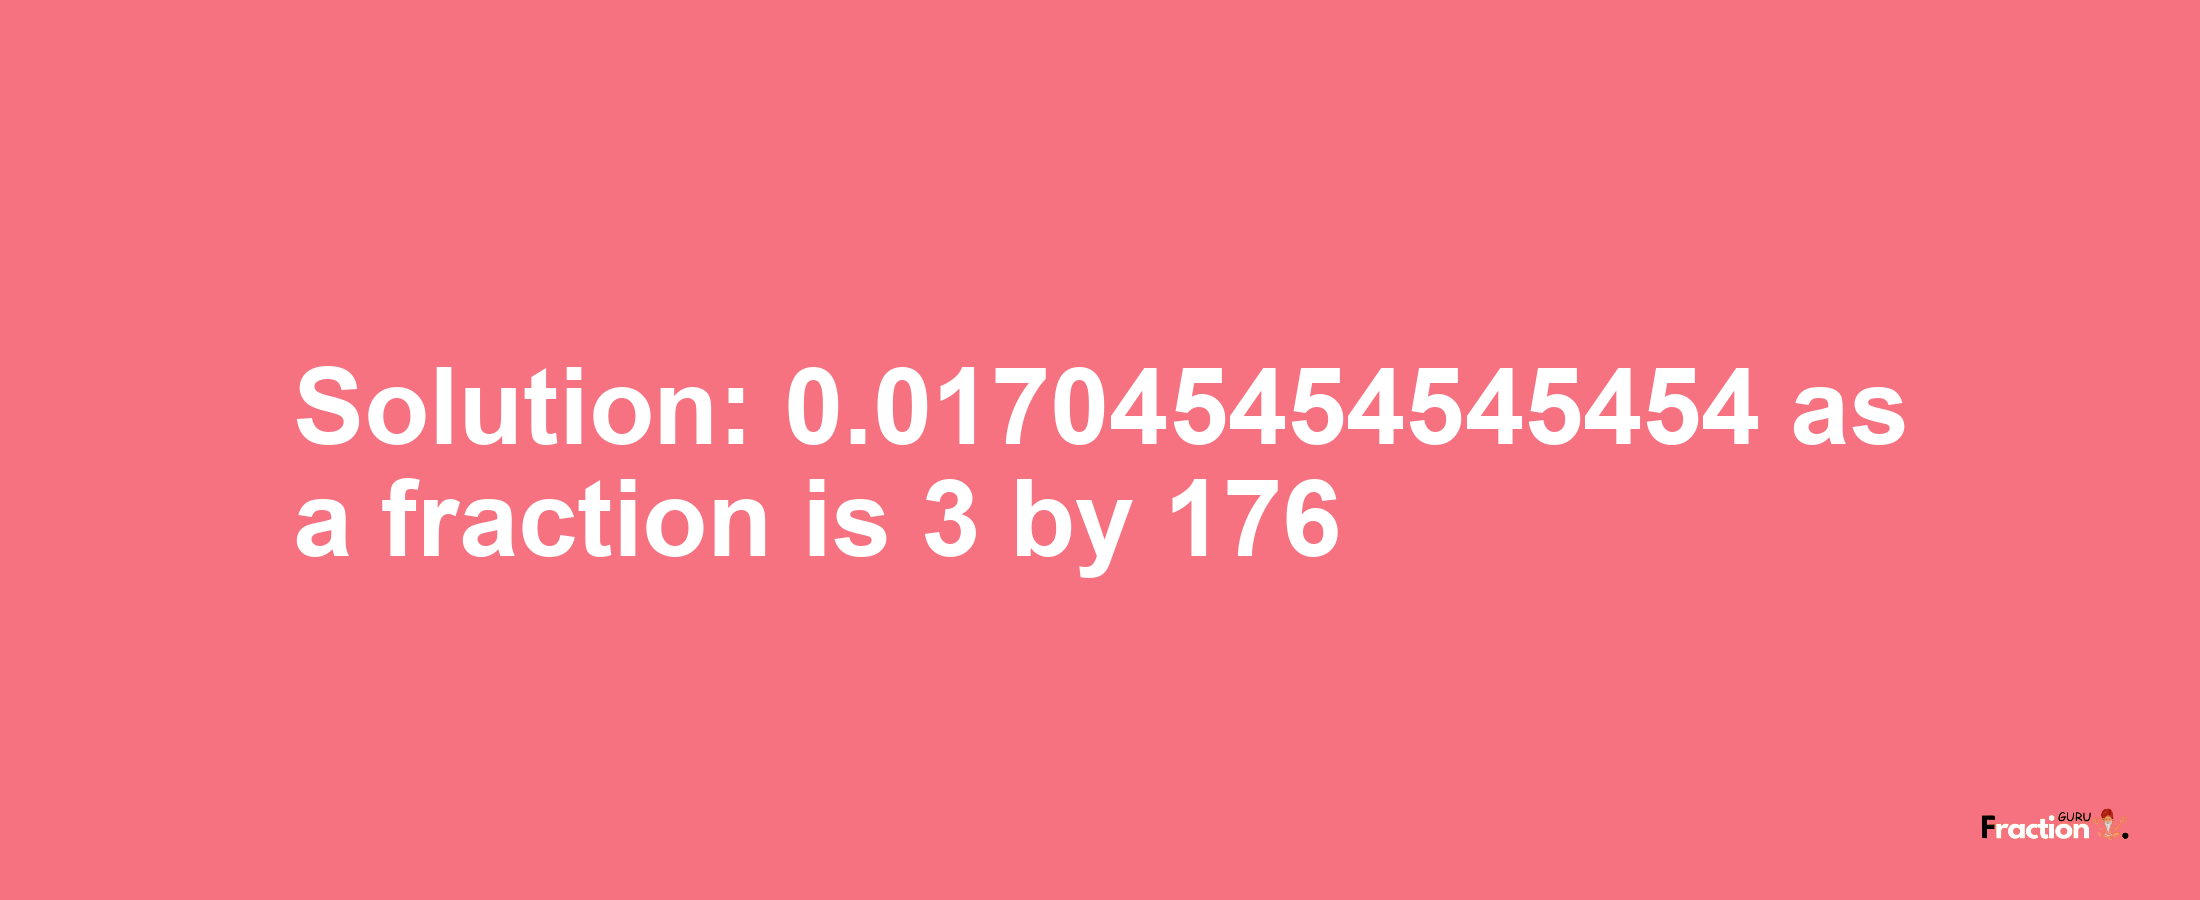 Solution:0.017045454545454 as a fraction is 3/176